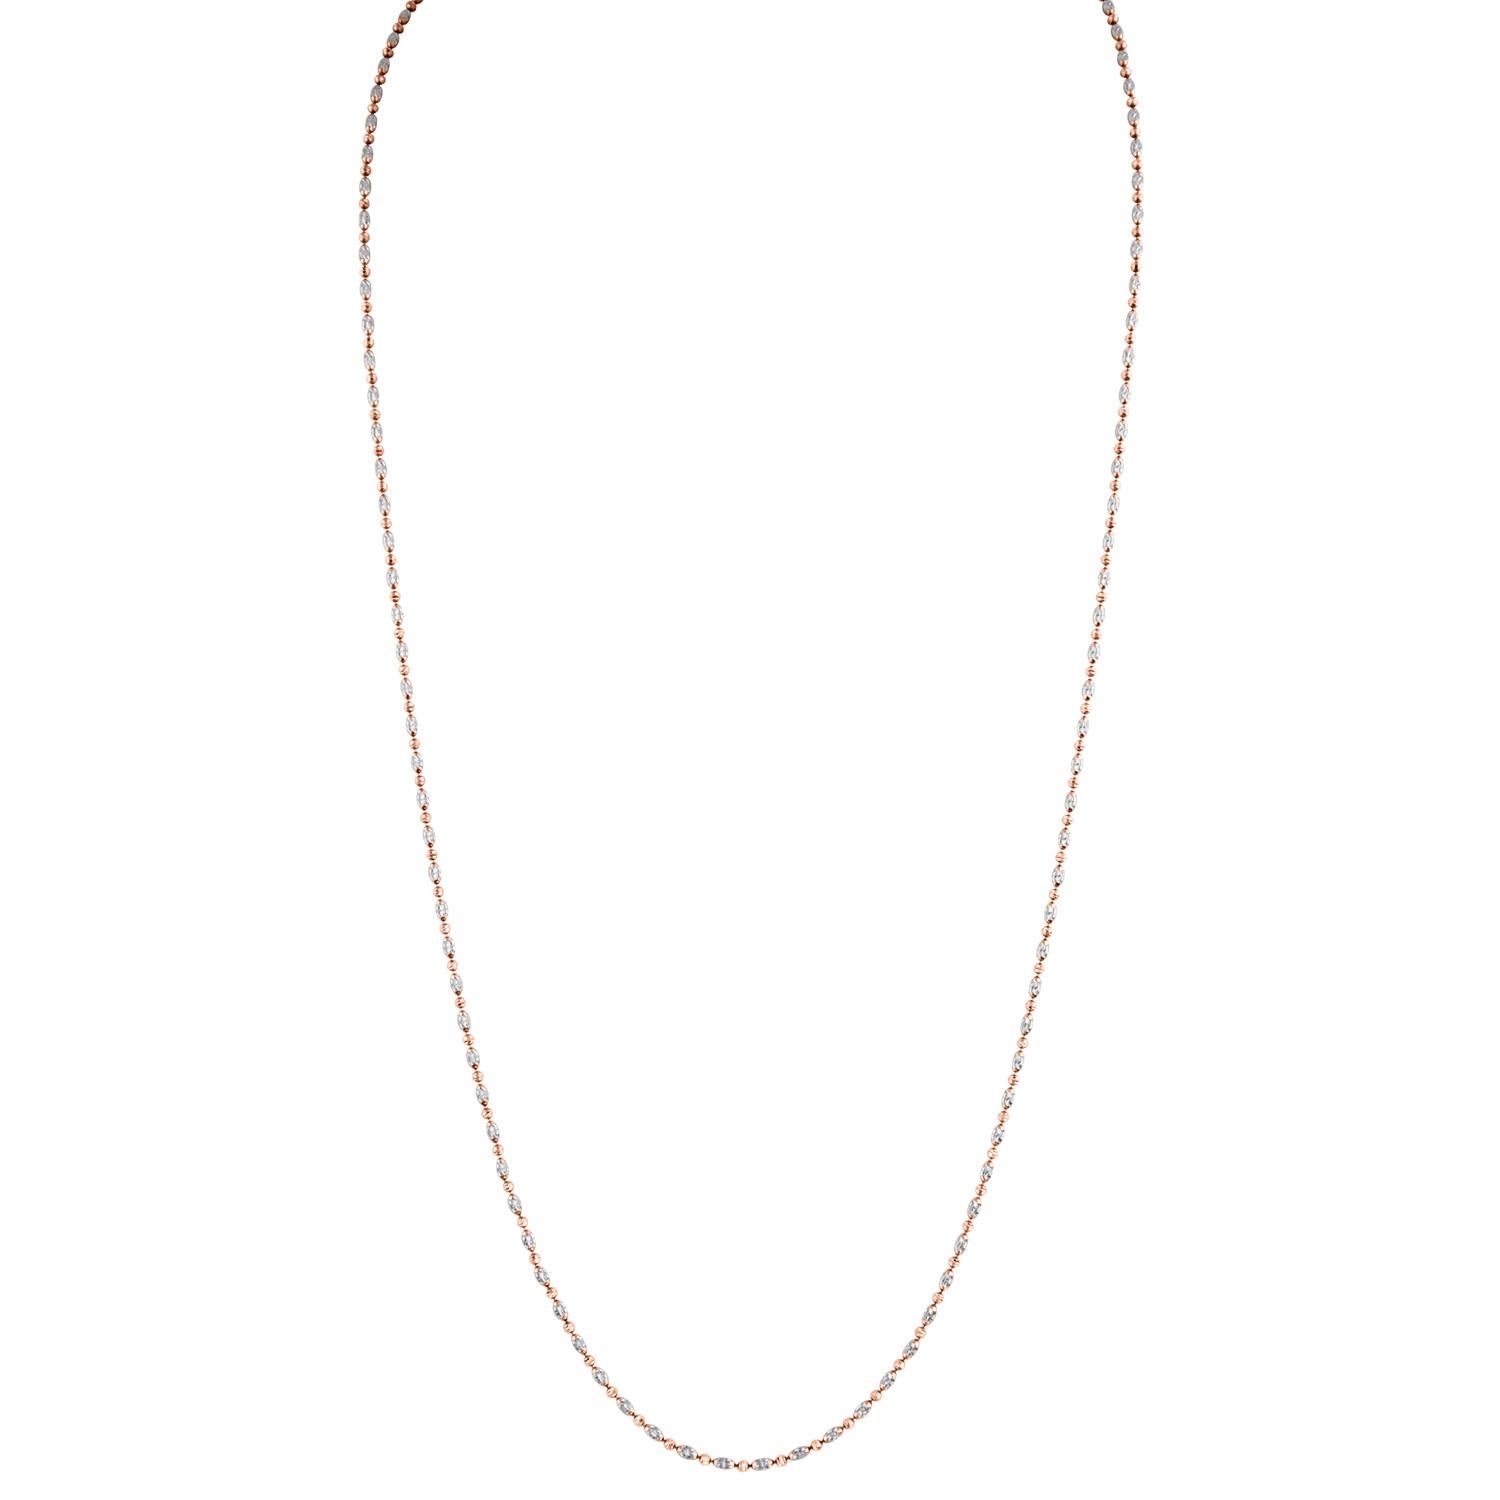 Beautiful Long Gold Chain
The chain is 14K/18K White Gold & Rose Gold
The chain is 30